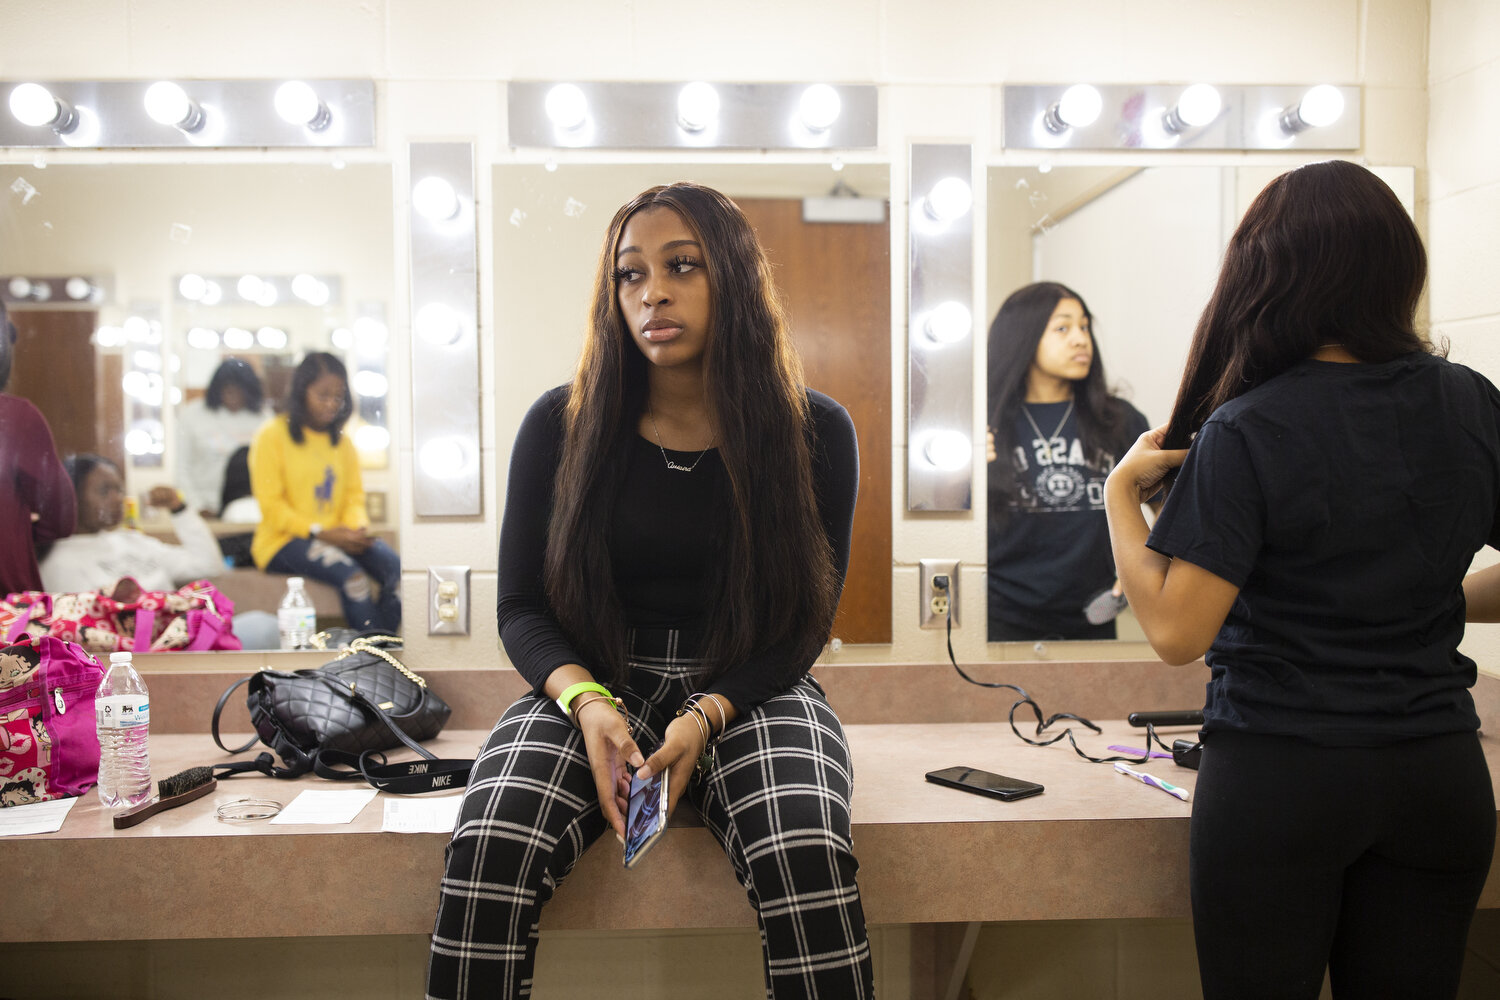  Senior Quiaira Powell watches her friends get ready to have their photos taken wearing caps and gowns a few months before graduation. Schools throughout North Carolina closed in March as a result of the coronavirus and a modified graduation ceremony